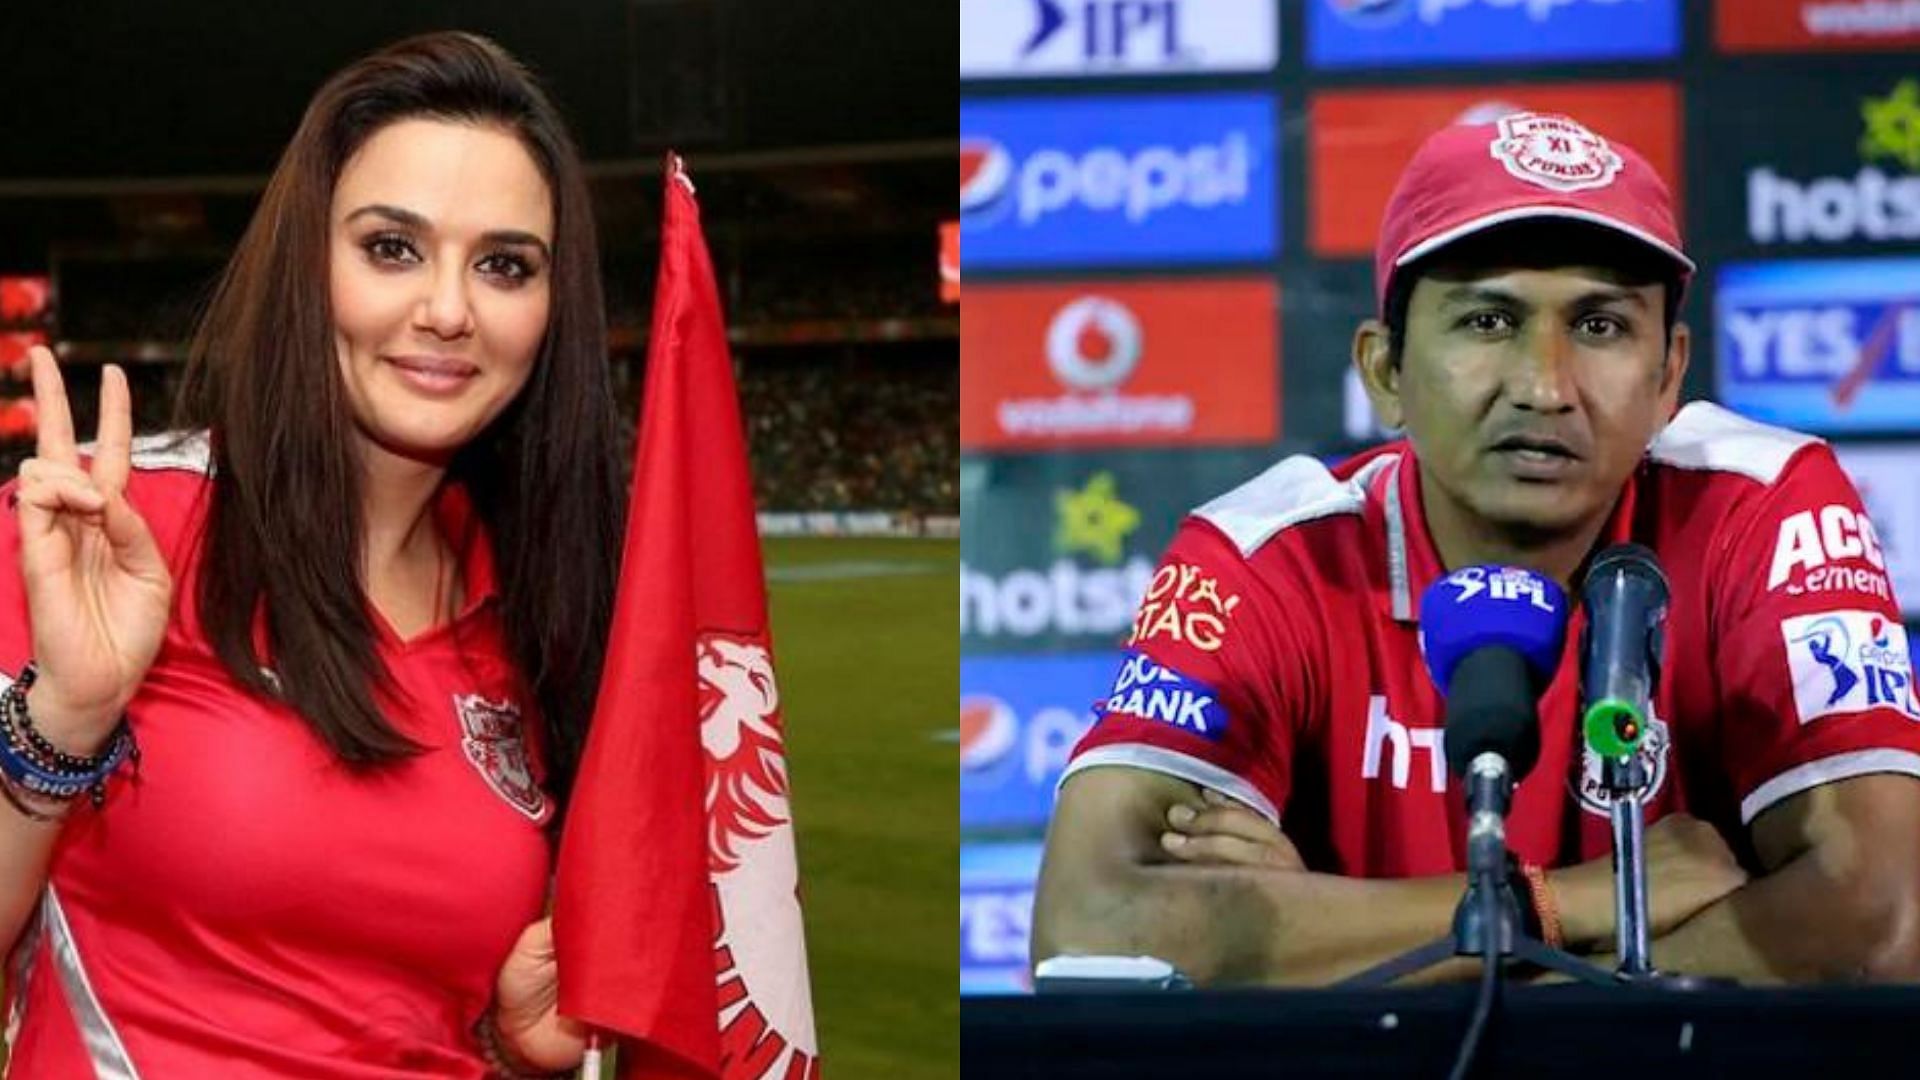 PBKS co-owner Preity Zinta allegedly lashed out at Sanjay Bangar in 2016 (Image: BCCI/IPL)